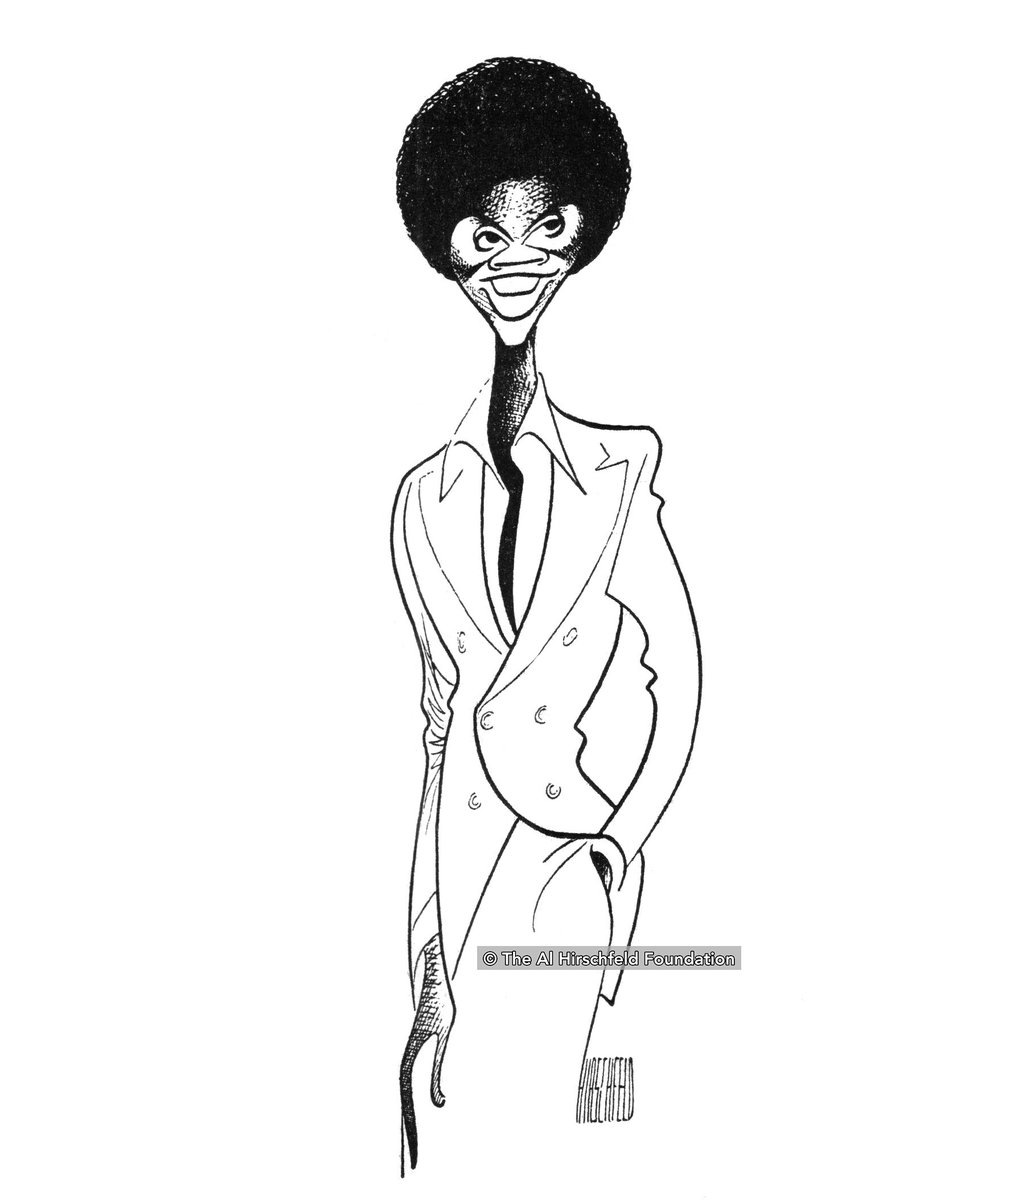 #OTD Lawrence Hilton Jacobs in I Love My Wife, 1979 #Hirschfeld #Art #Drawing #OnThisDate #ILoveMyWife #LawrenceHiltonJacobs